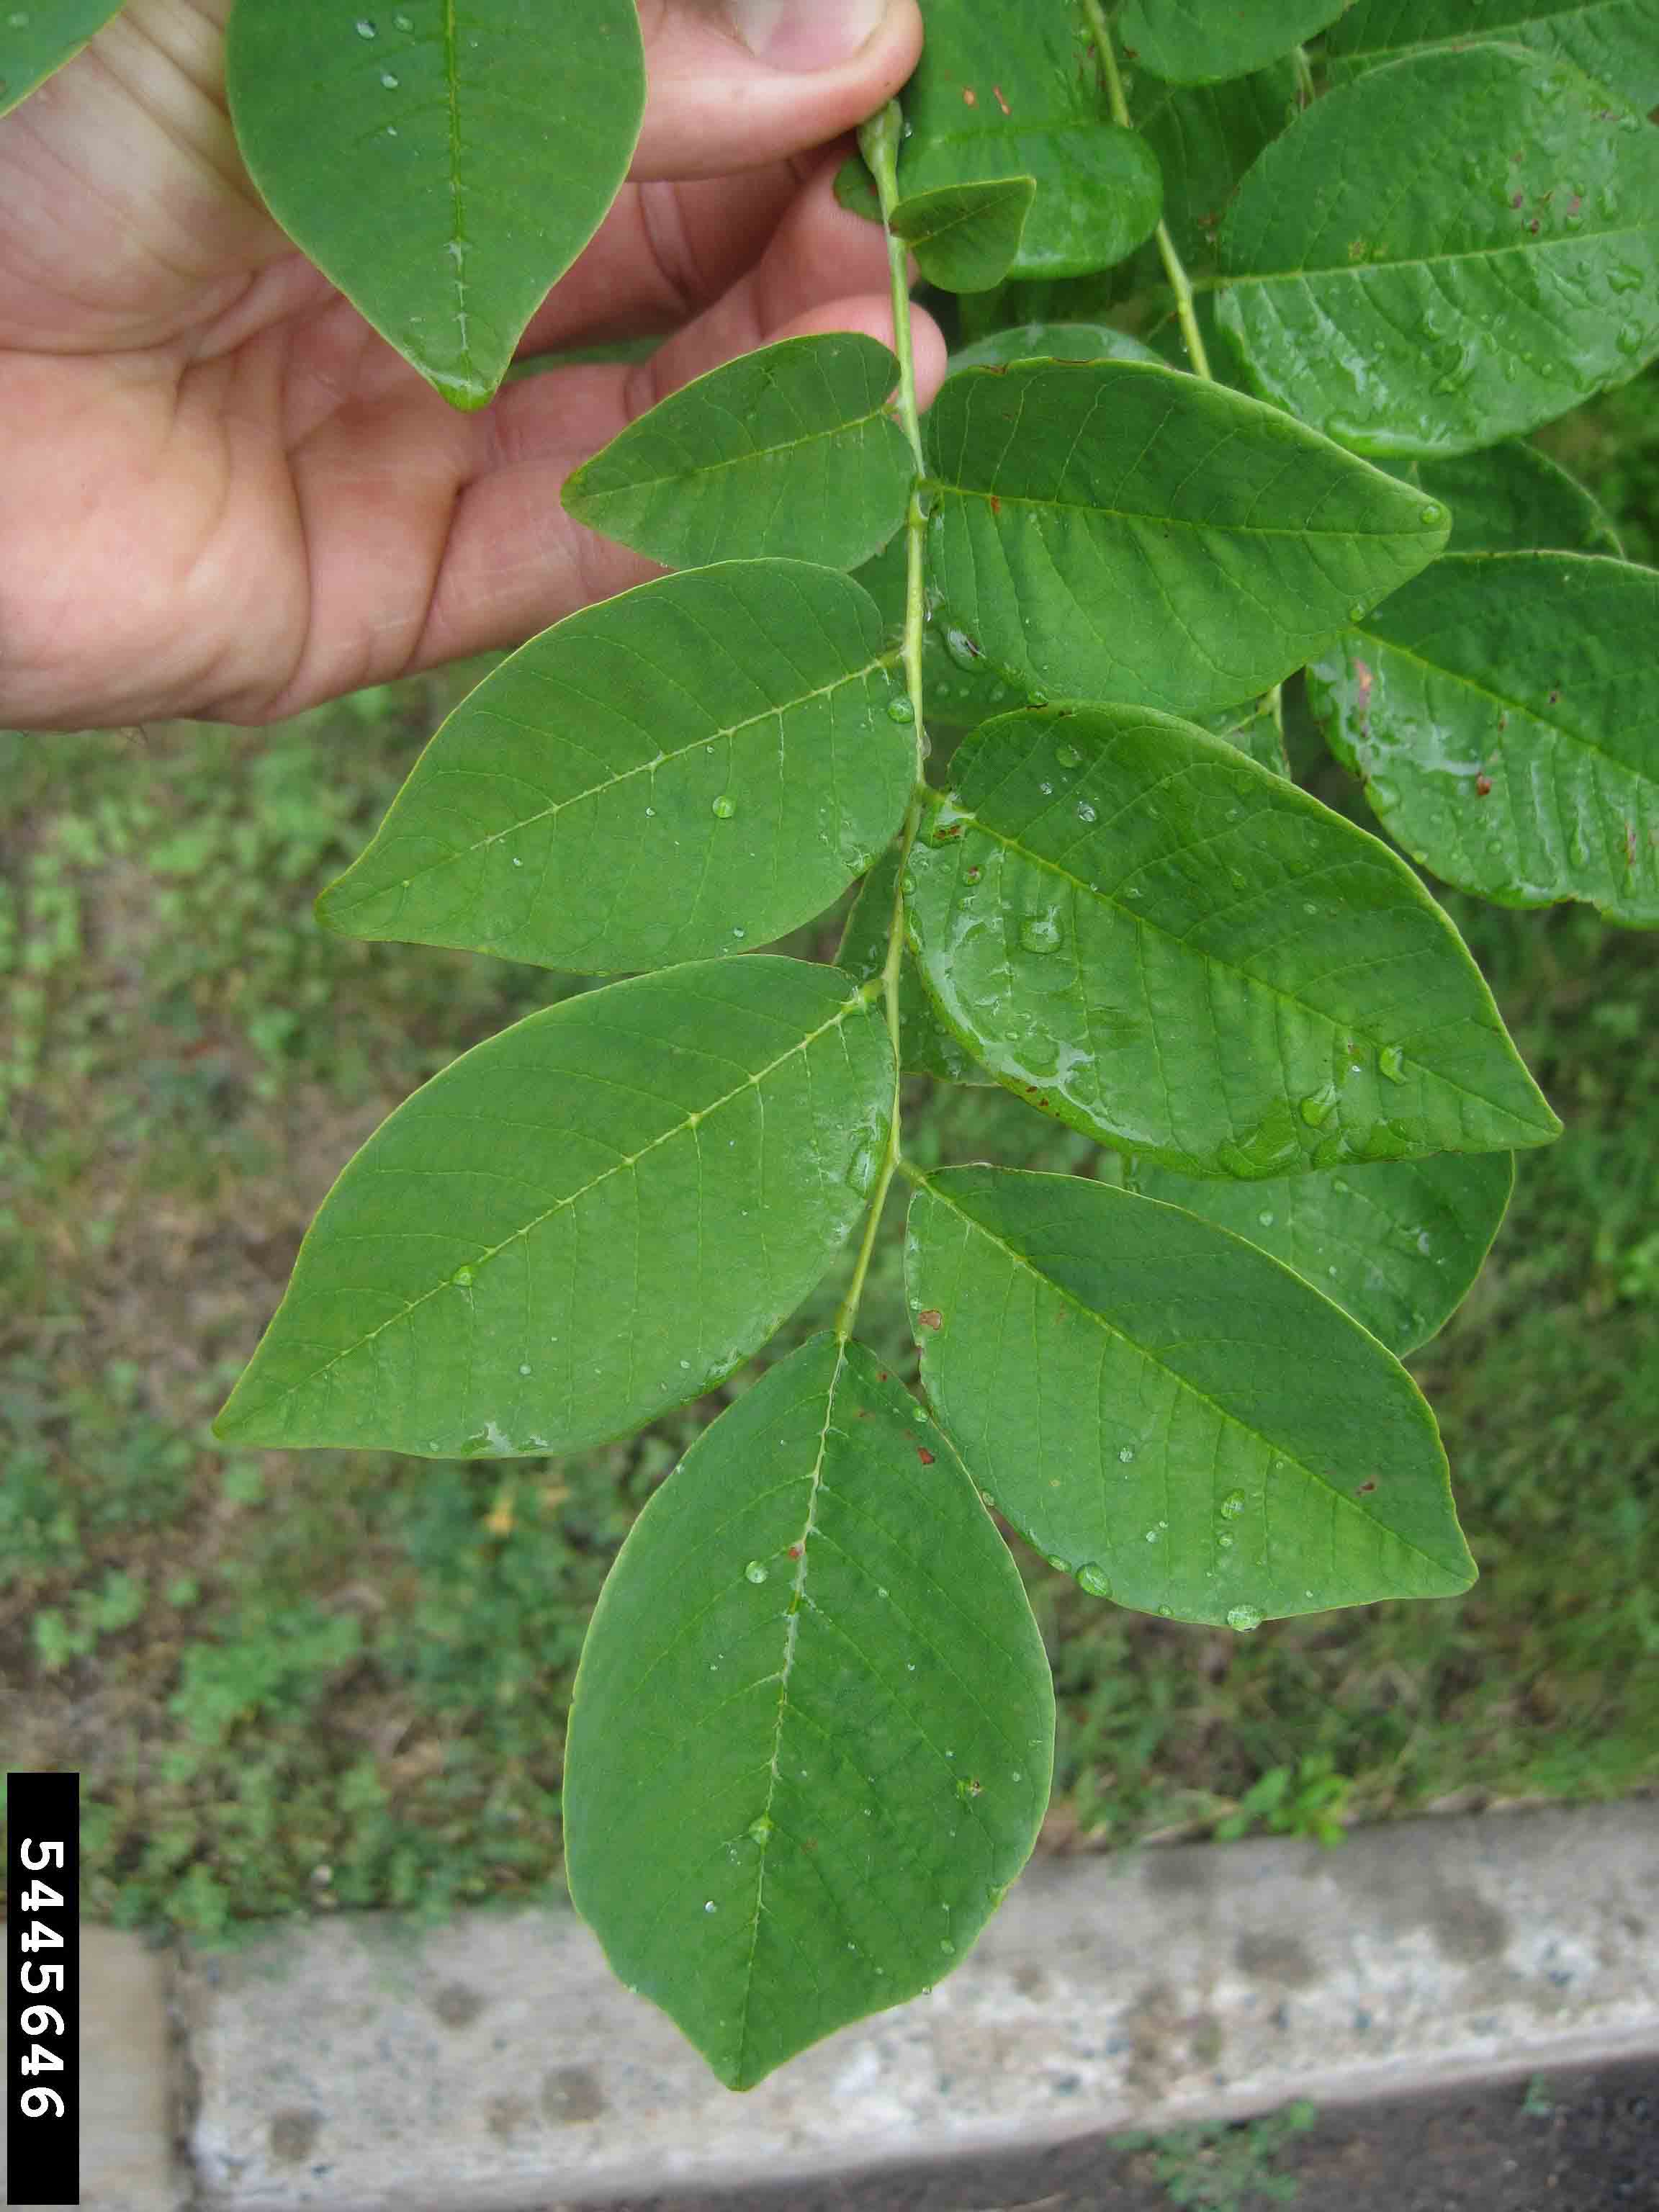 Yellowwood leaf, pinnately compound and 8"-12" long with 7-11 leaflets with smooth margins